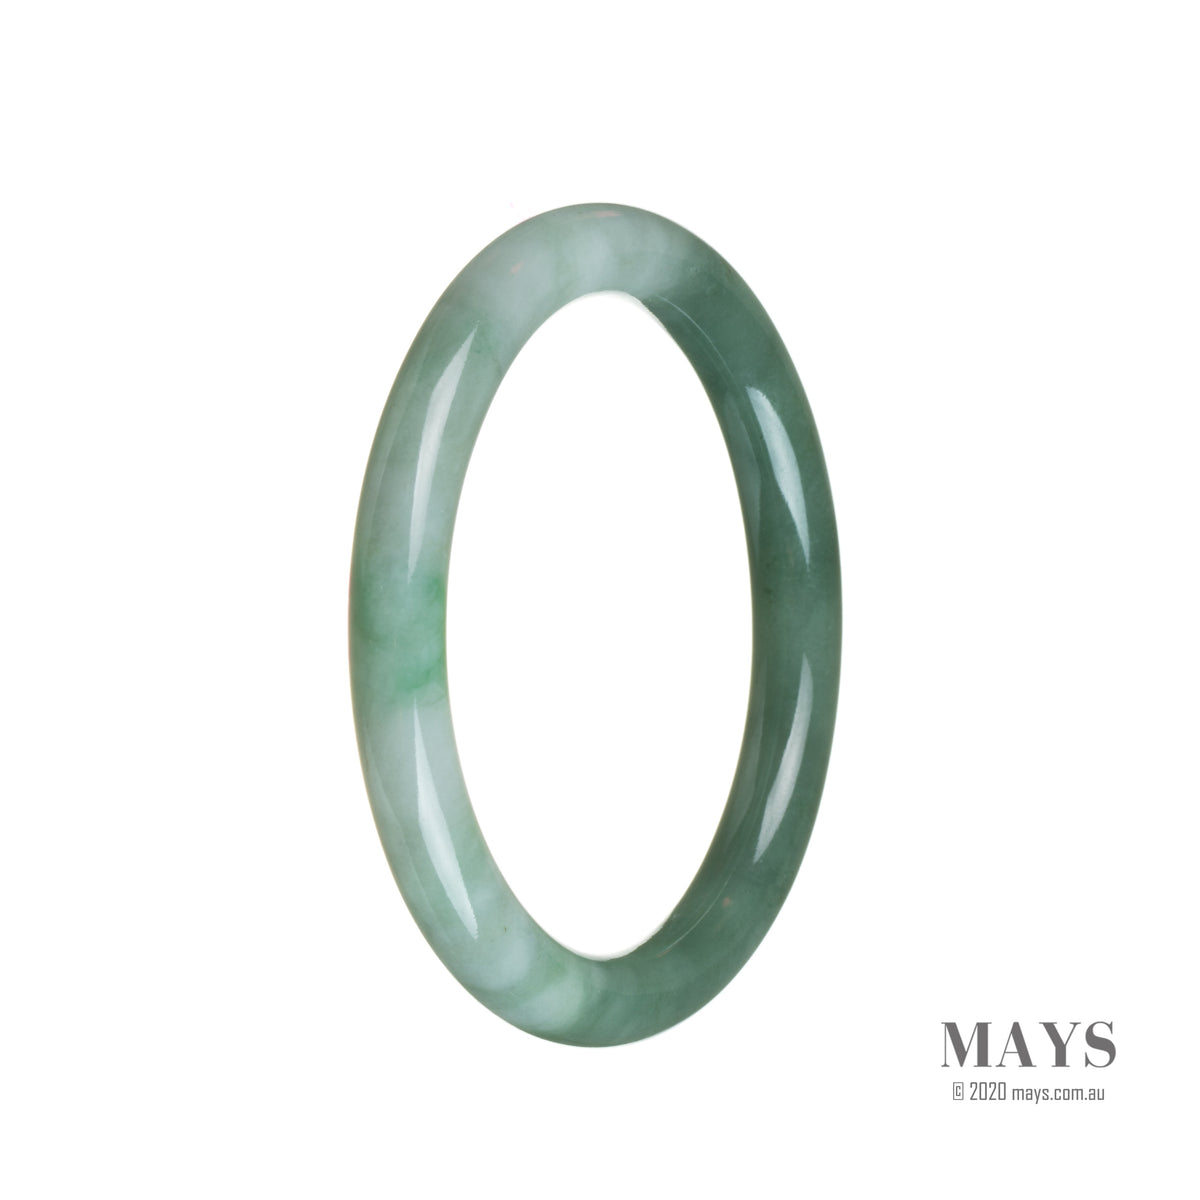 A small, round Burmese Jade bangle with a beautiful green pattern, made from genuine Grade A jade. Perfect for those with petite wrists, measuring 55mm in diameter. Designed by MAYS.